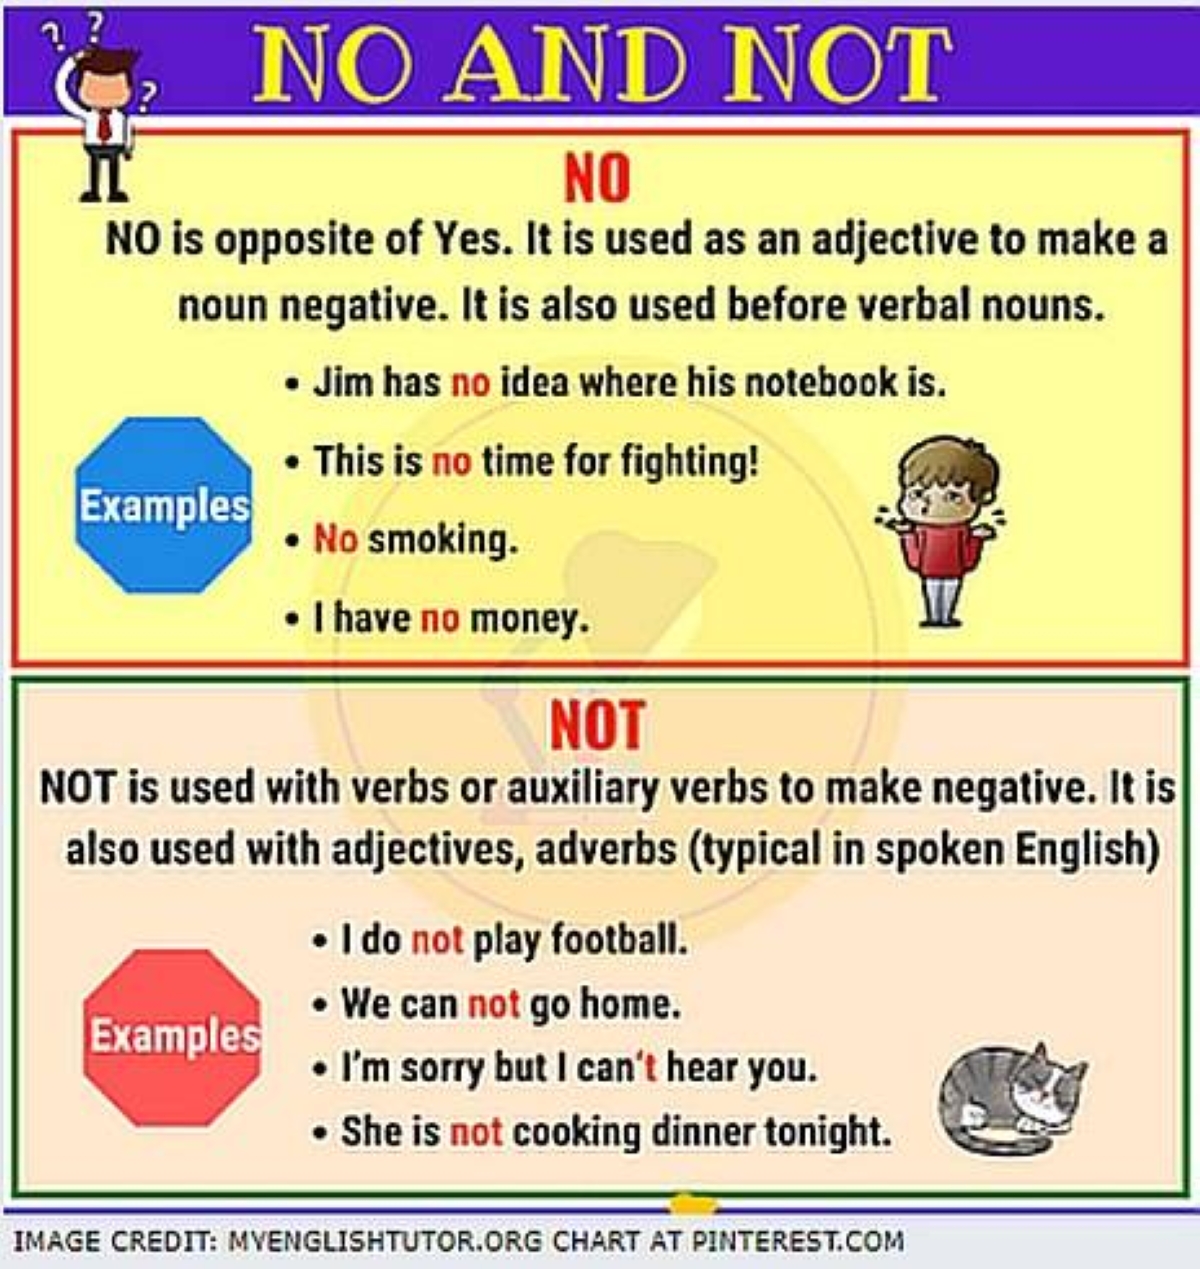 How to form our negative sentences correctly